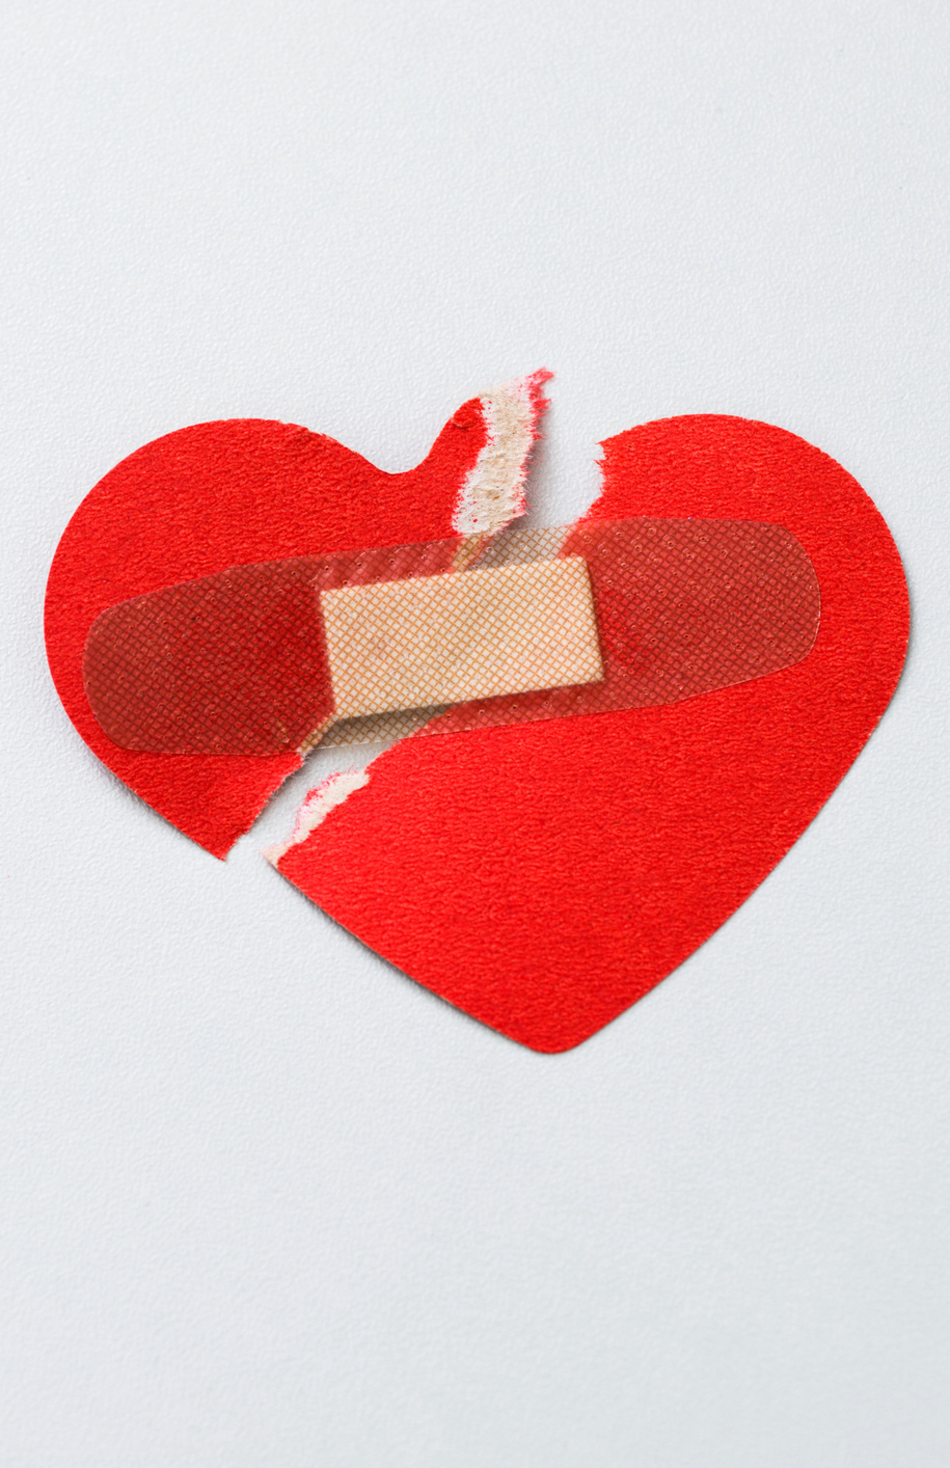 More Than a Metaphor – Broken Hearts Are Real